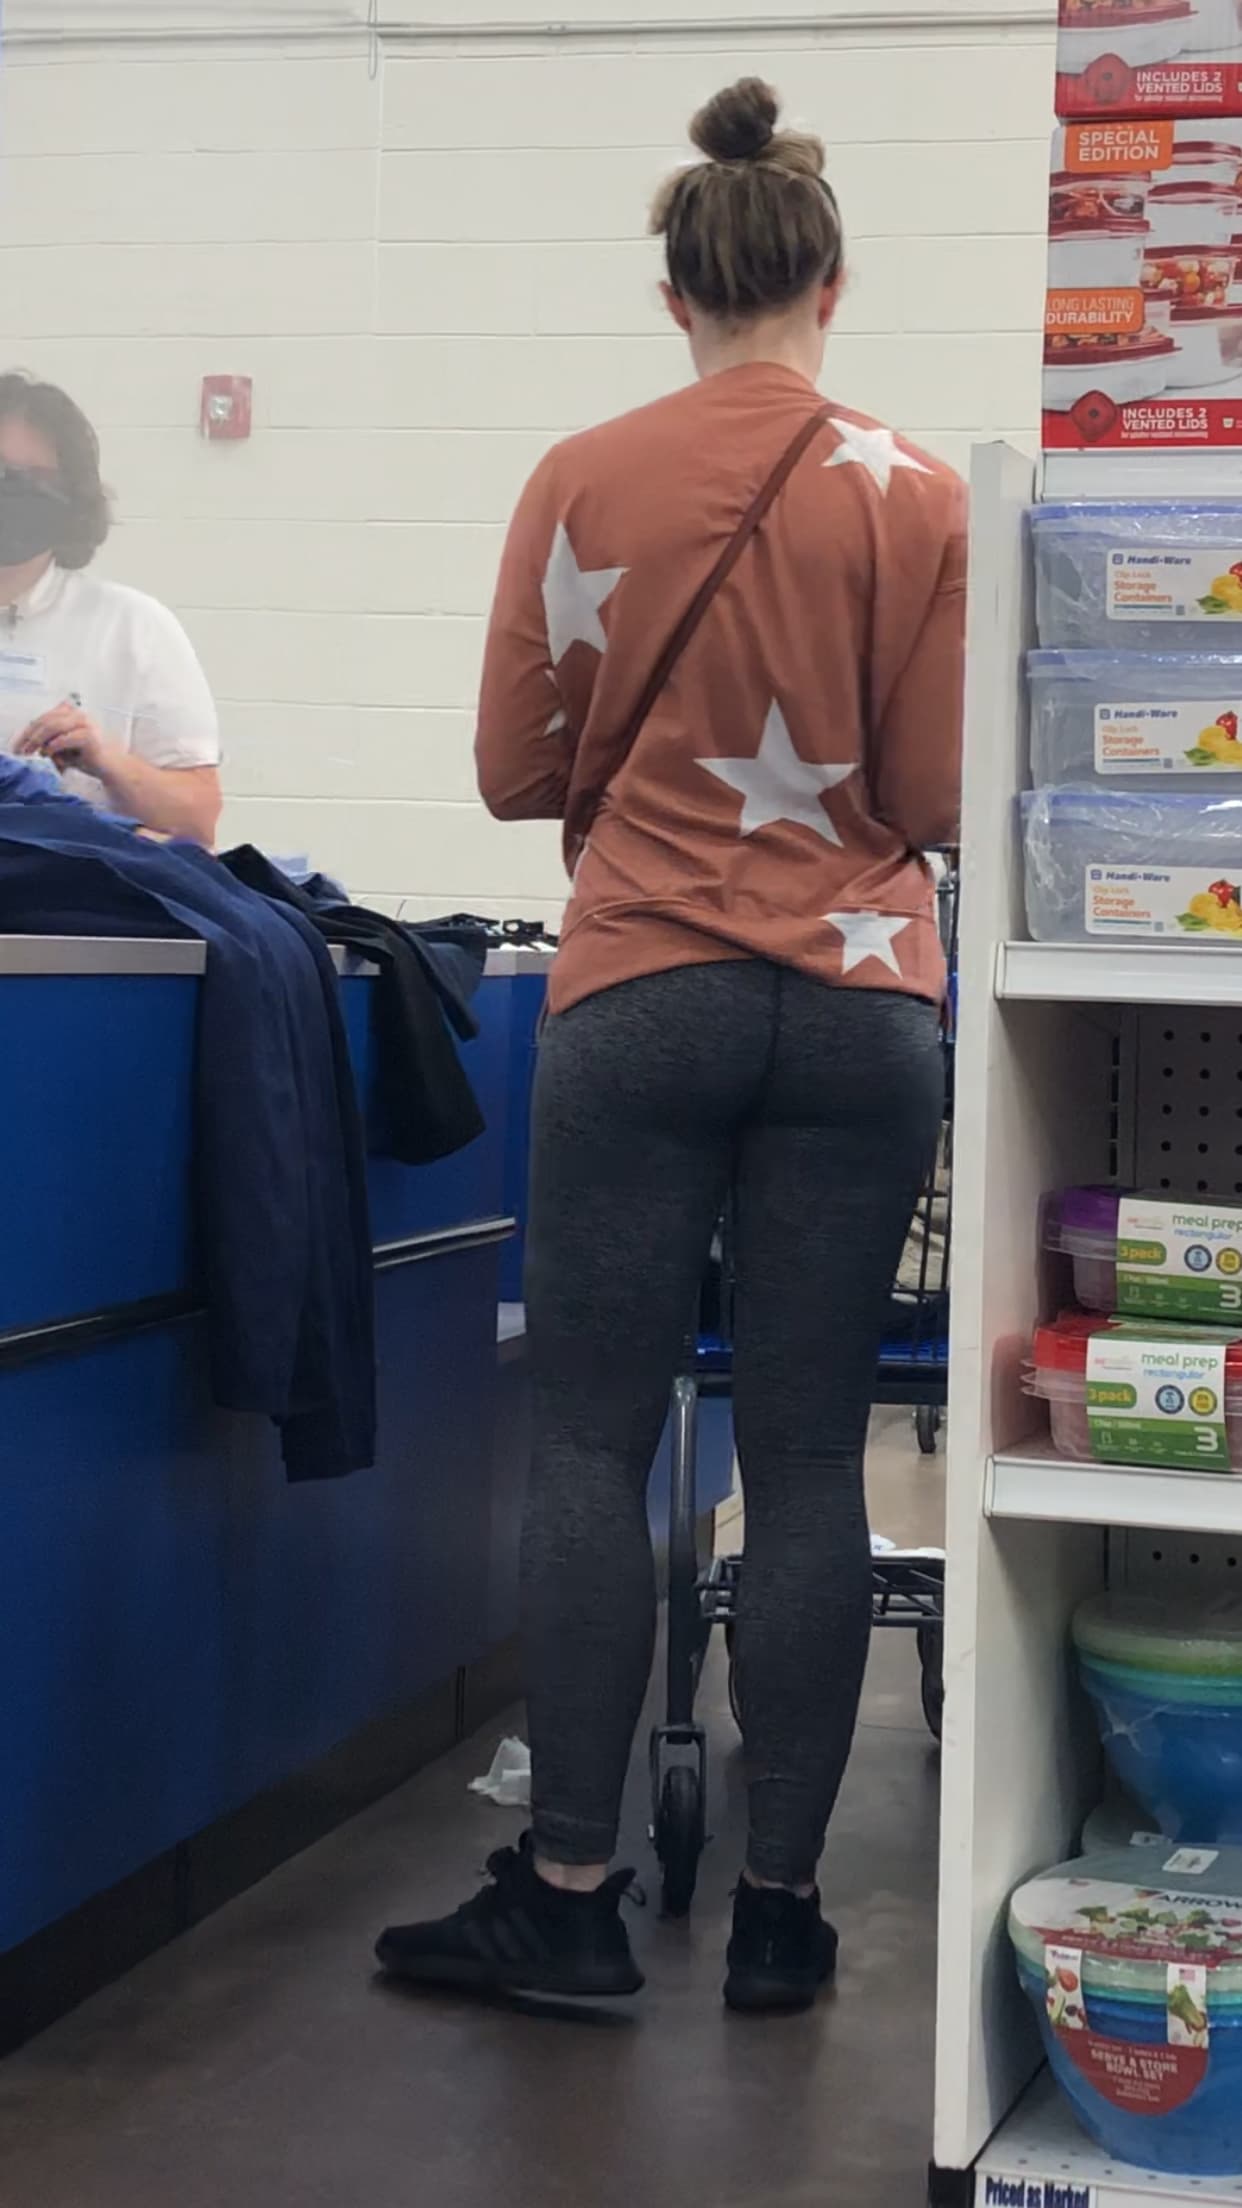 Gray leggings girl checking out at the thrift shop - Spandex, Leggings ...